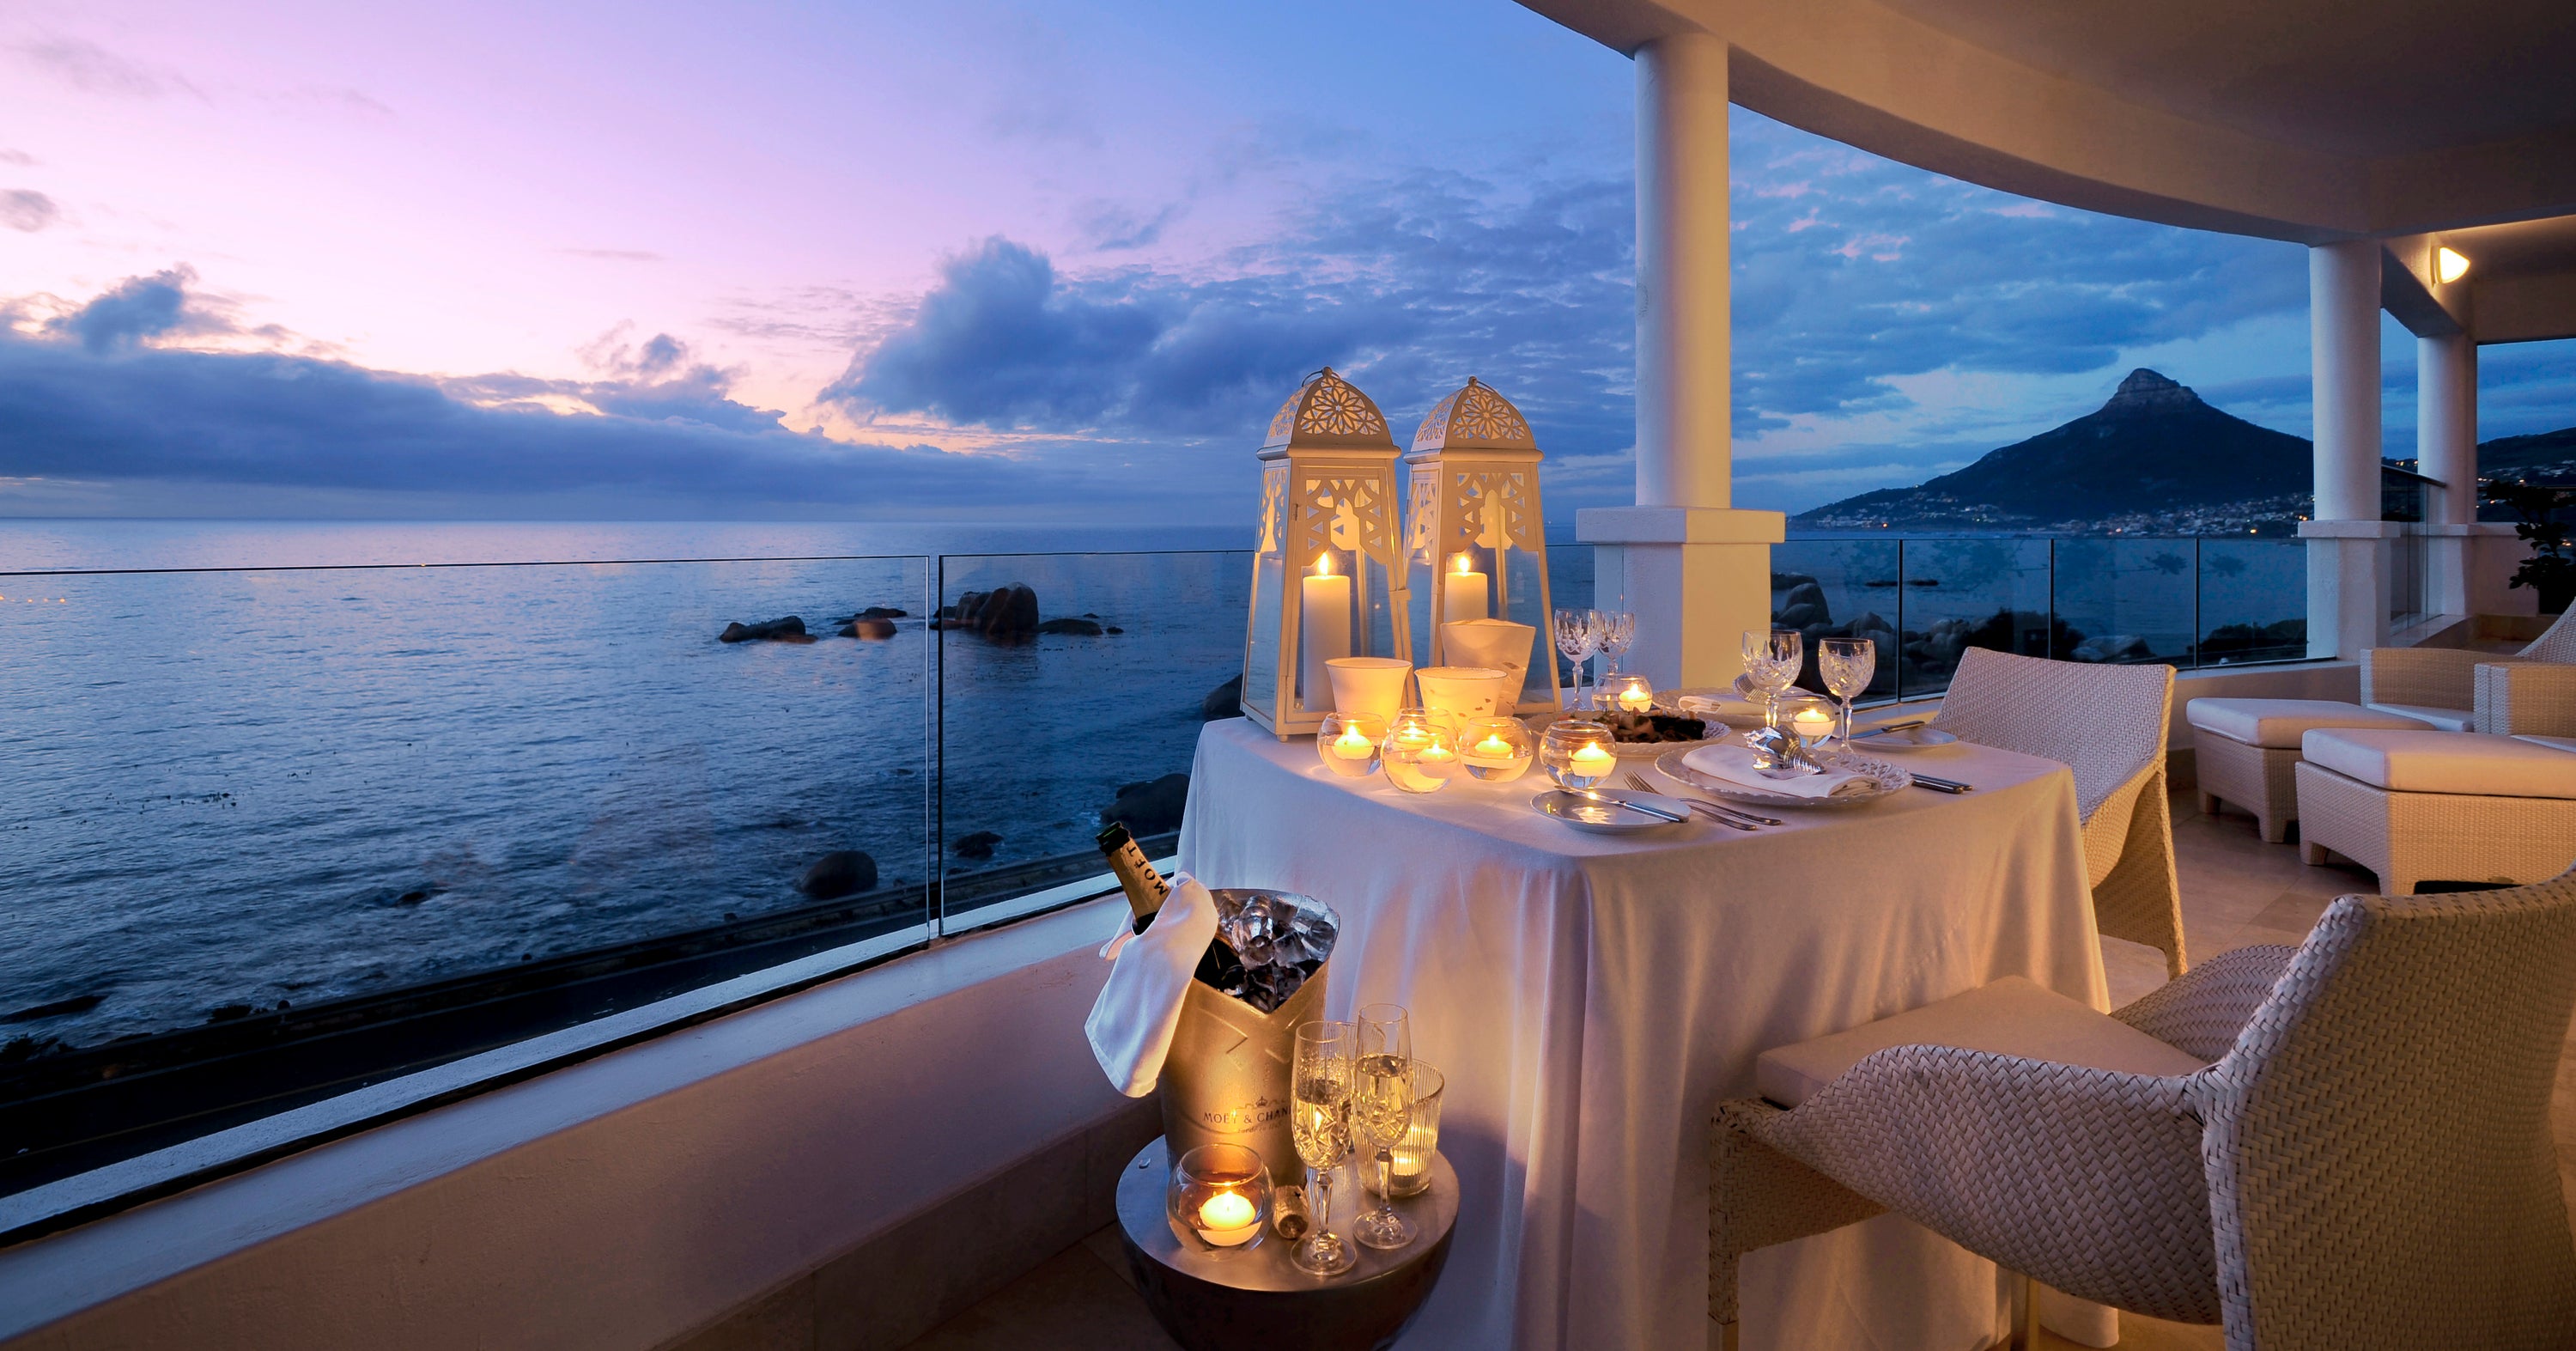 Top 5 romantic Valentine's Day getaways in Cape Town